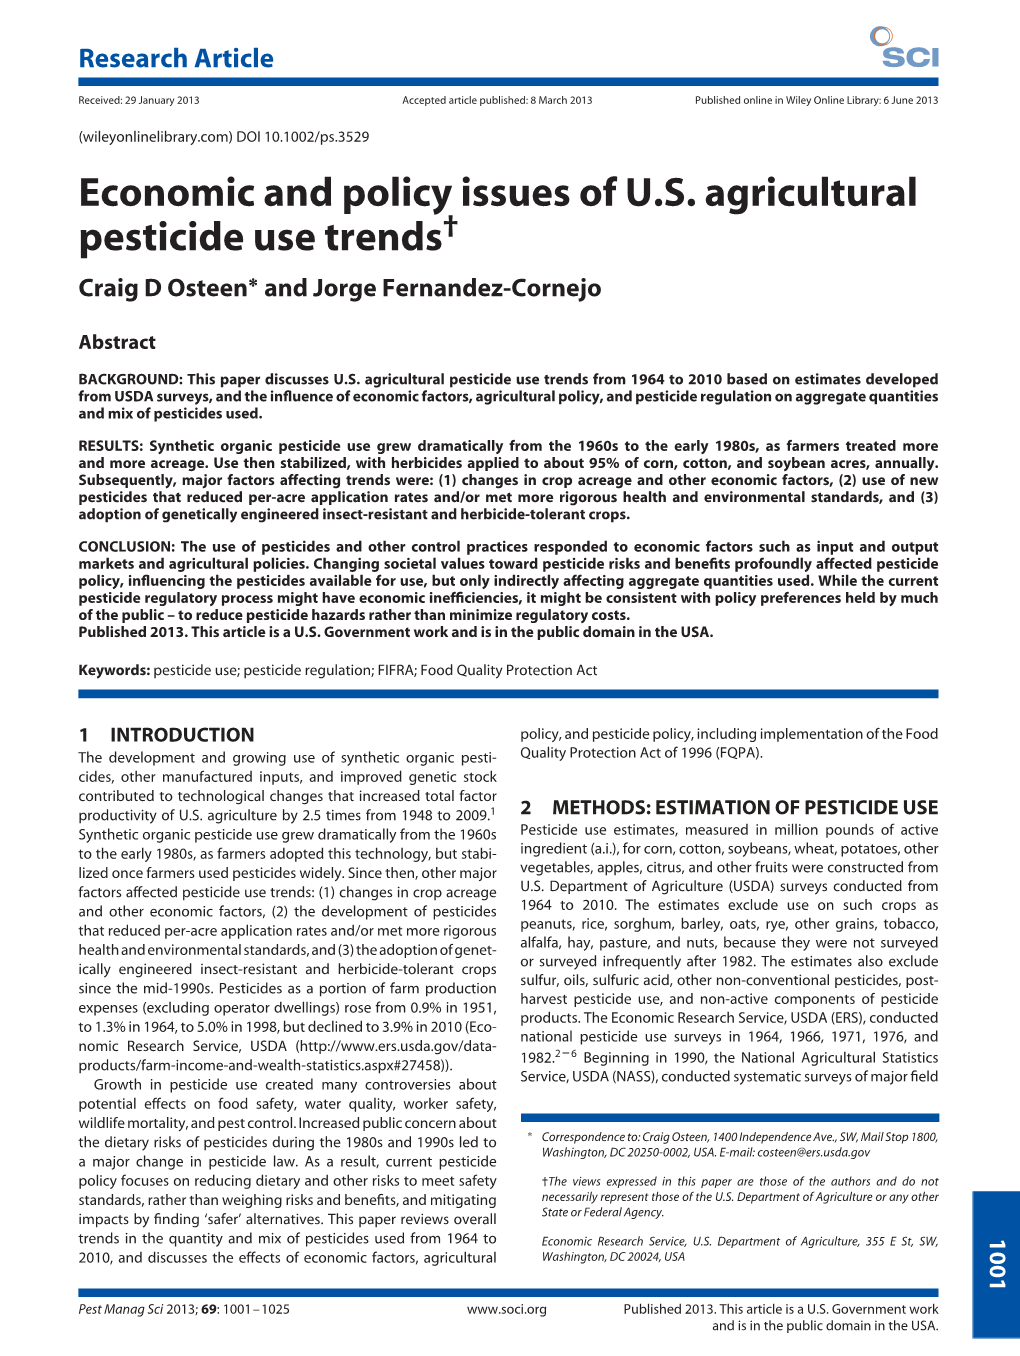 Economic and Policy Issues of U.S. Agricultural Pesticide Use Trends